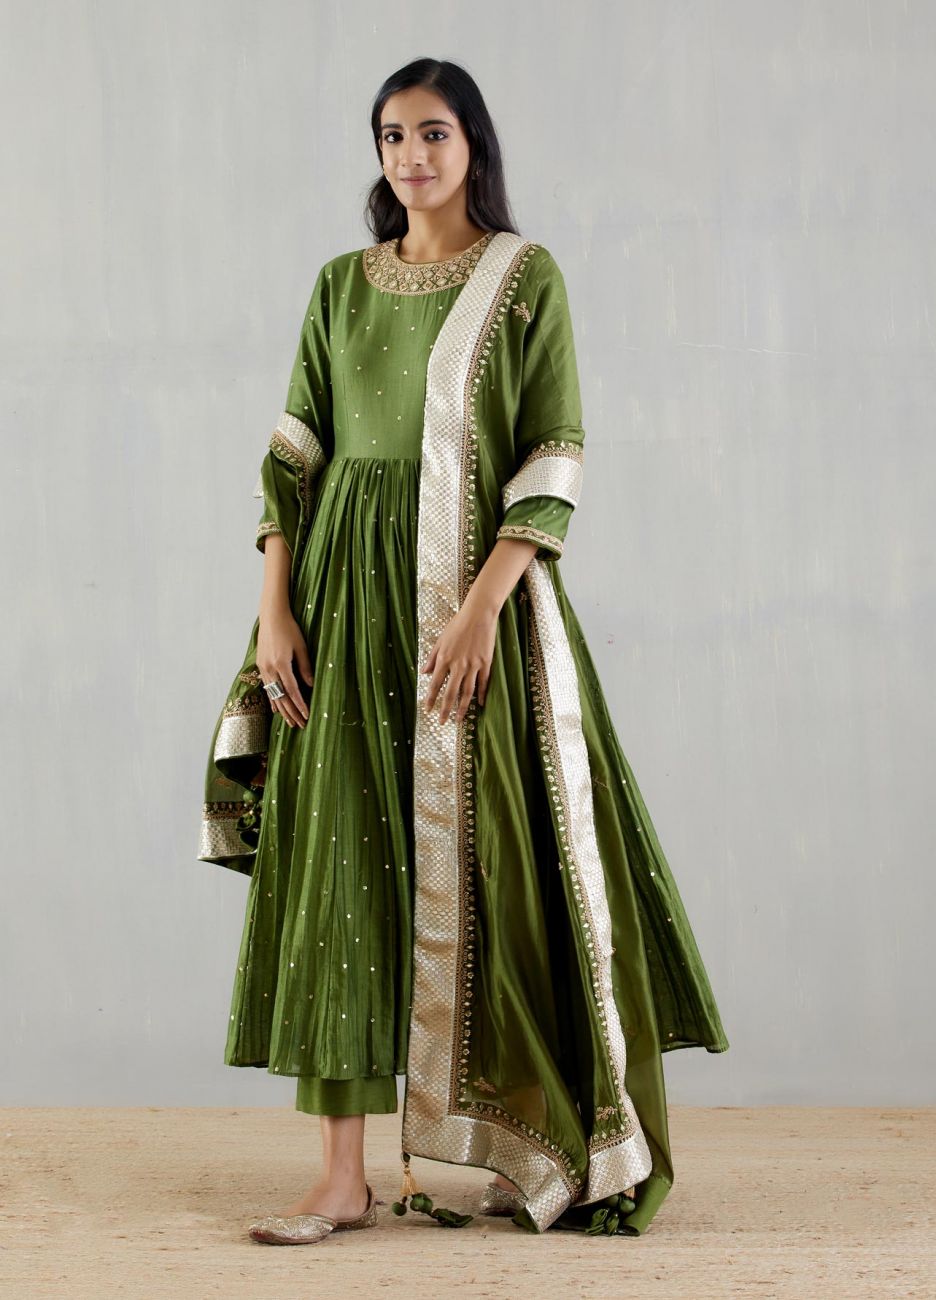 Green Embroidered Anarkali Set Indian Clothing in Denver, CO, Aurora, CO, Boulder, CO, Fort Collins, CO, Colorado Springs, CO, Parker, CO, Highlands Ranch, CO, Cherry Creek, CO, Centennial, CO, and Longmont, CO. NATIONWIDE SHIPPING USA- India Fashion X